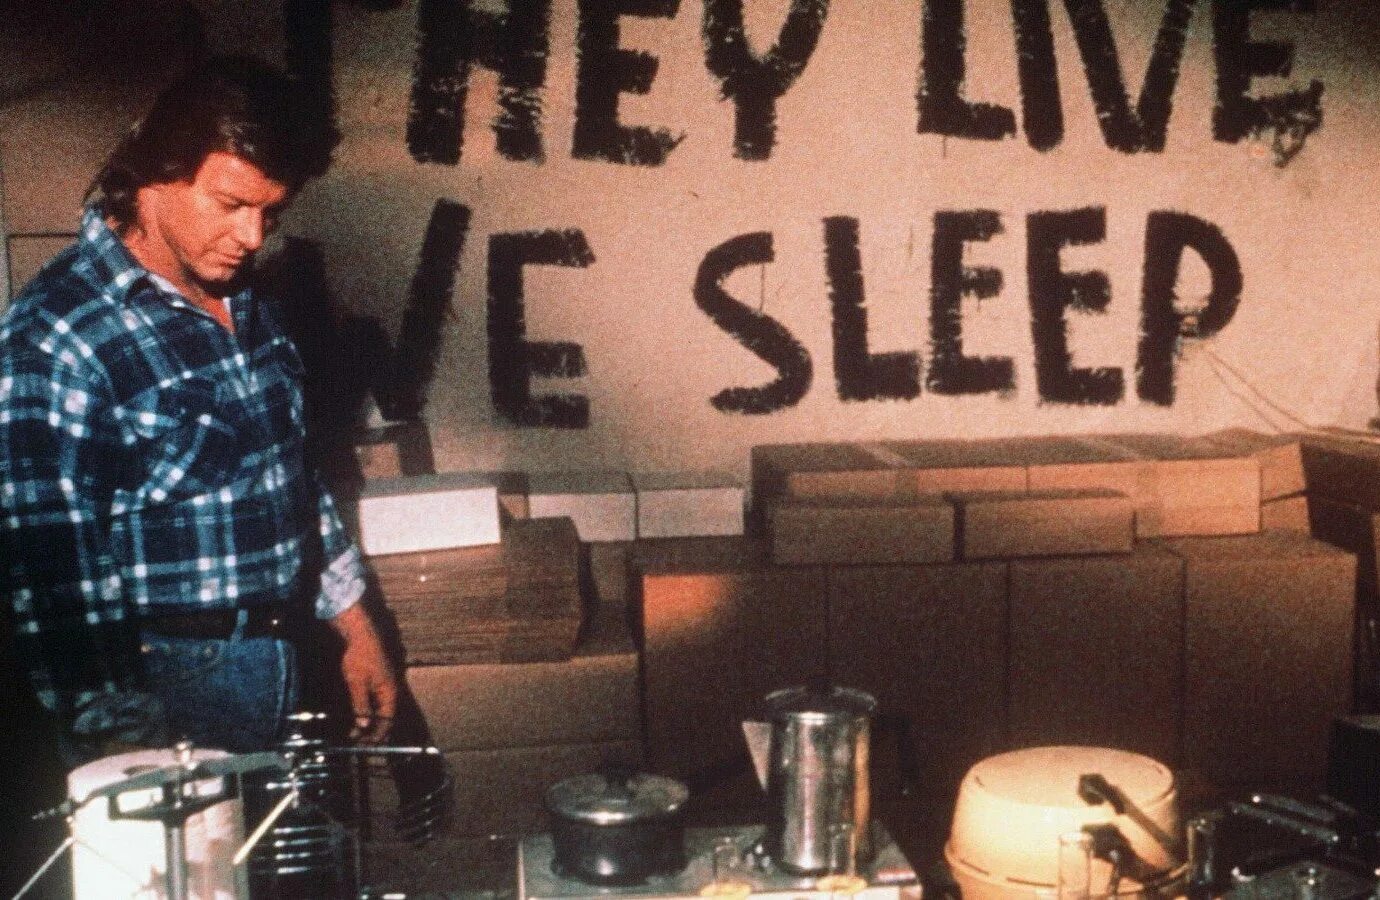 They lives или they live. Чужие среди нас / they Live.